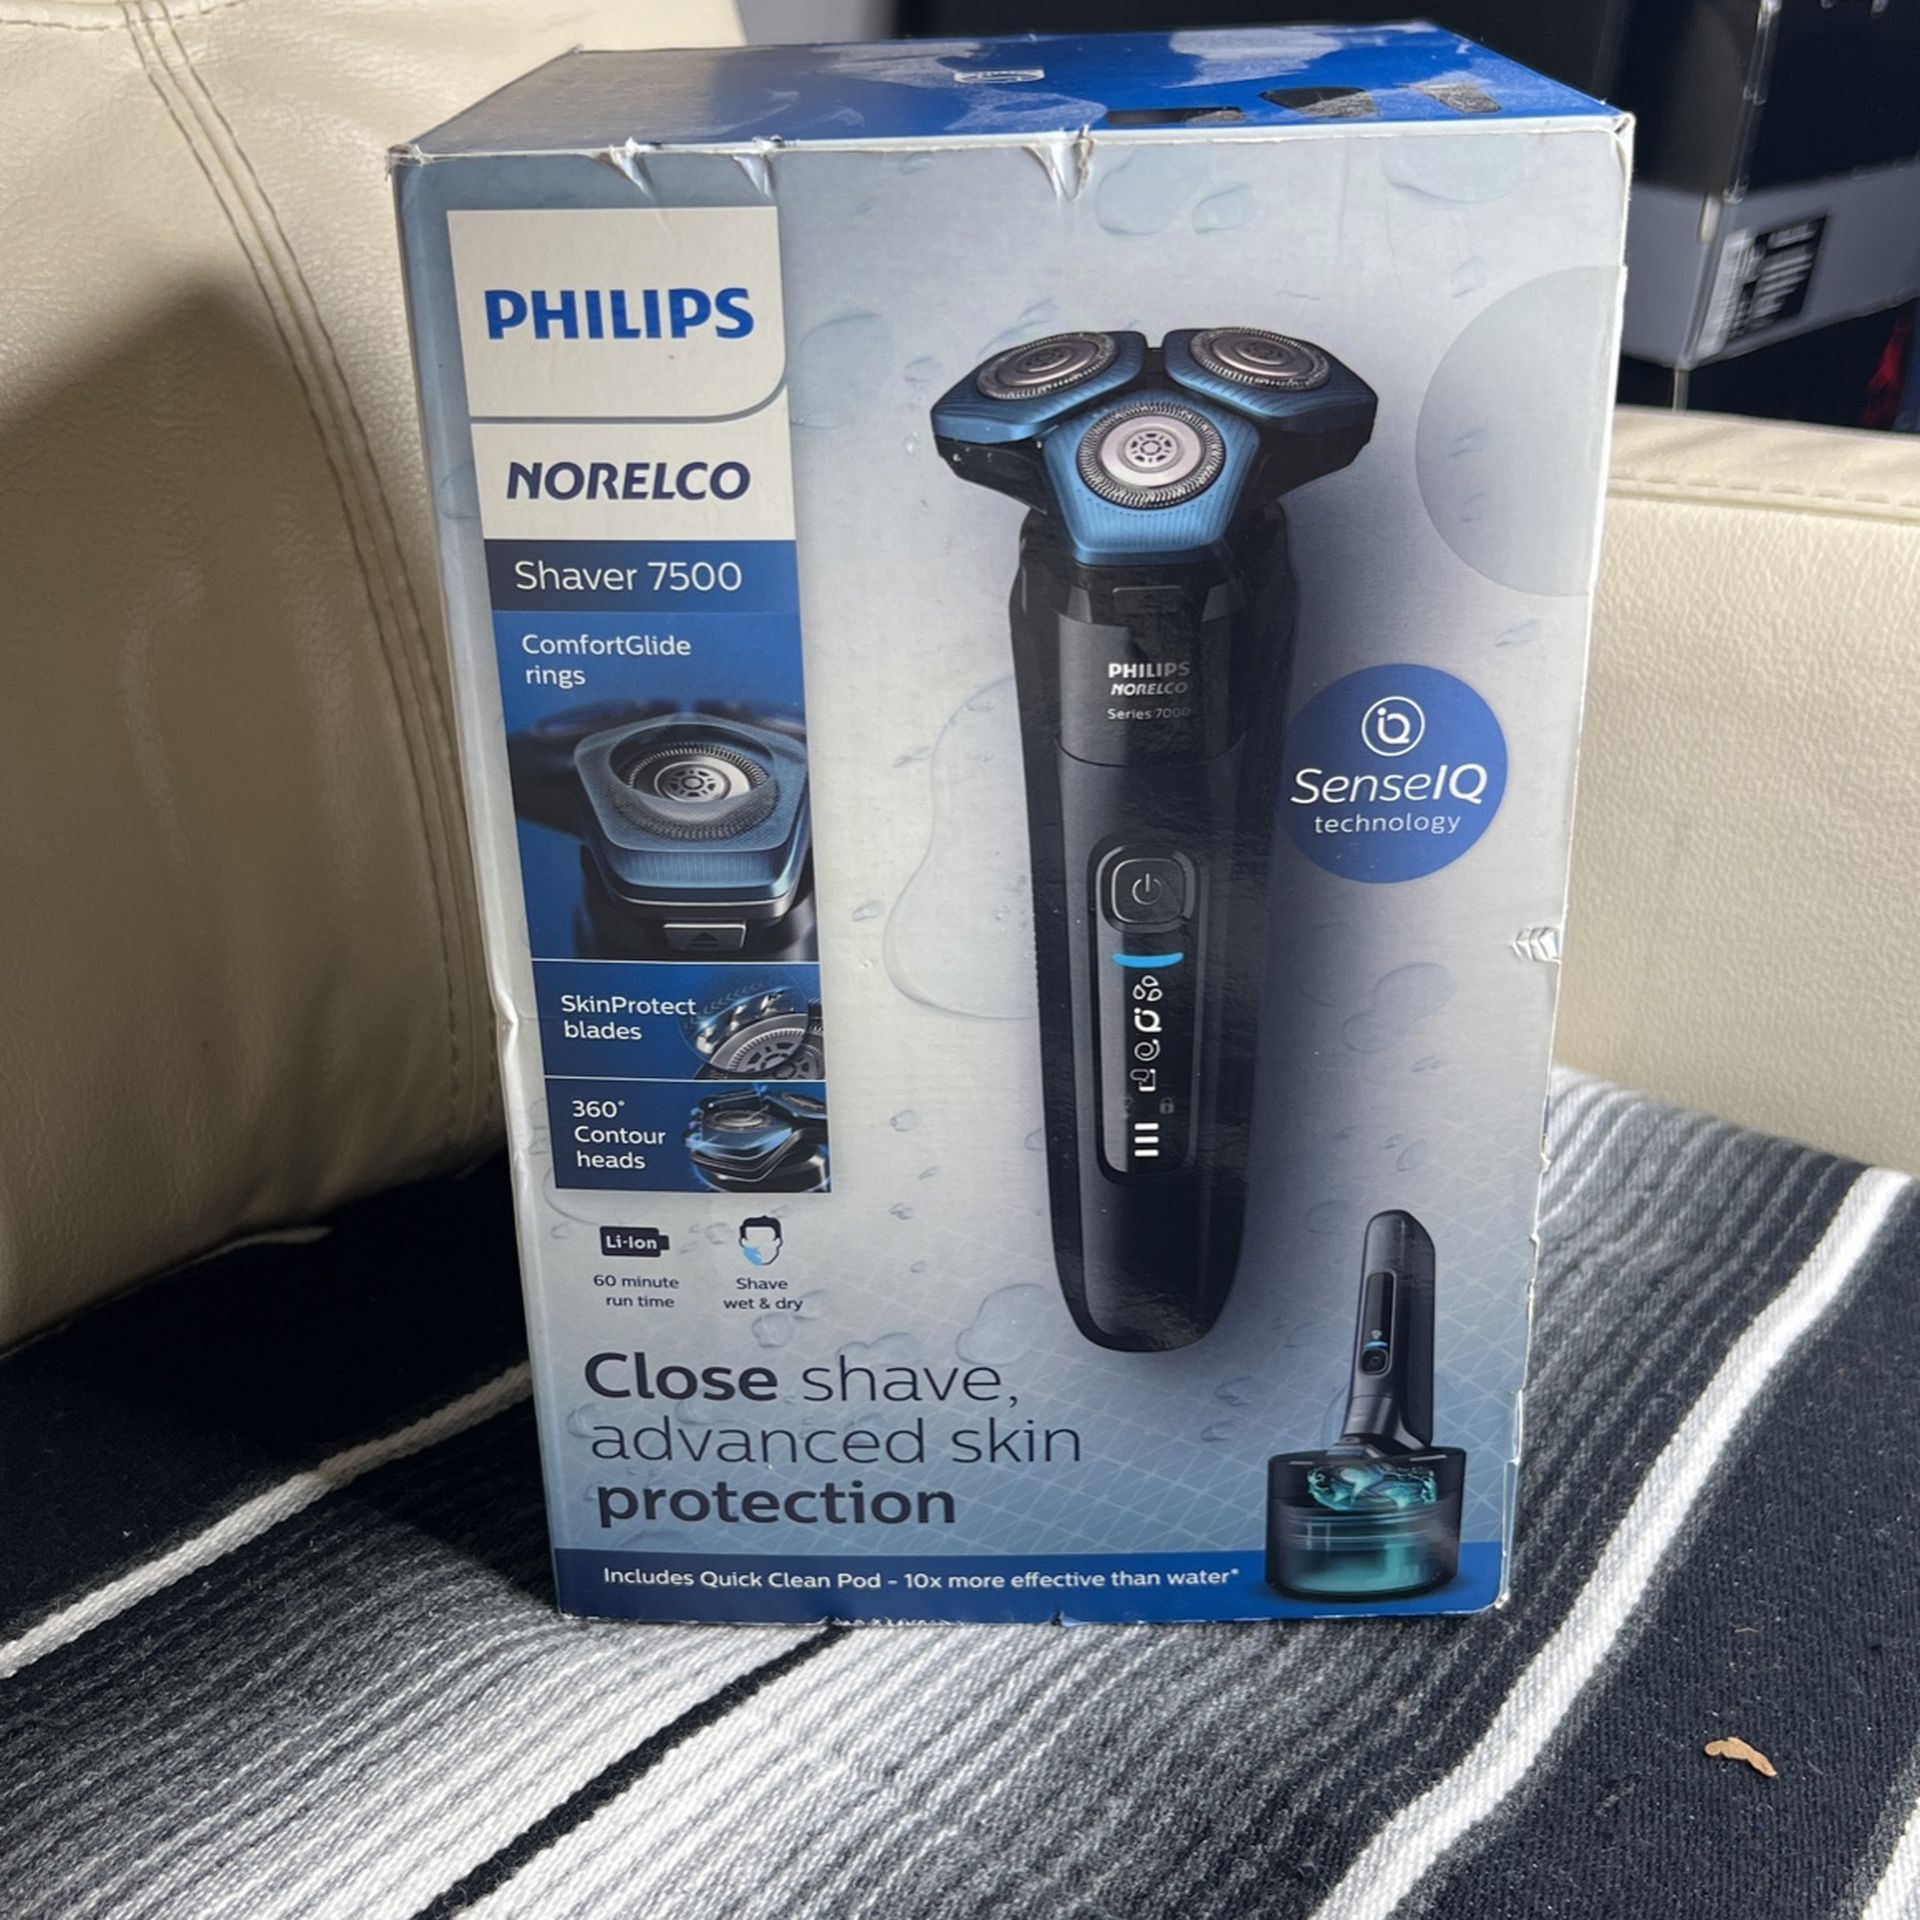 Philips, Norelco Shaver